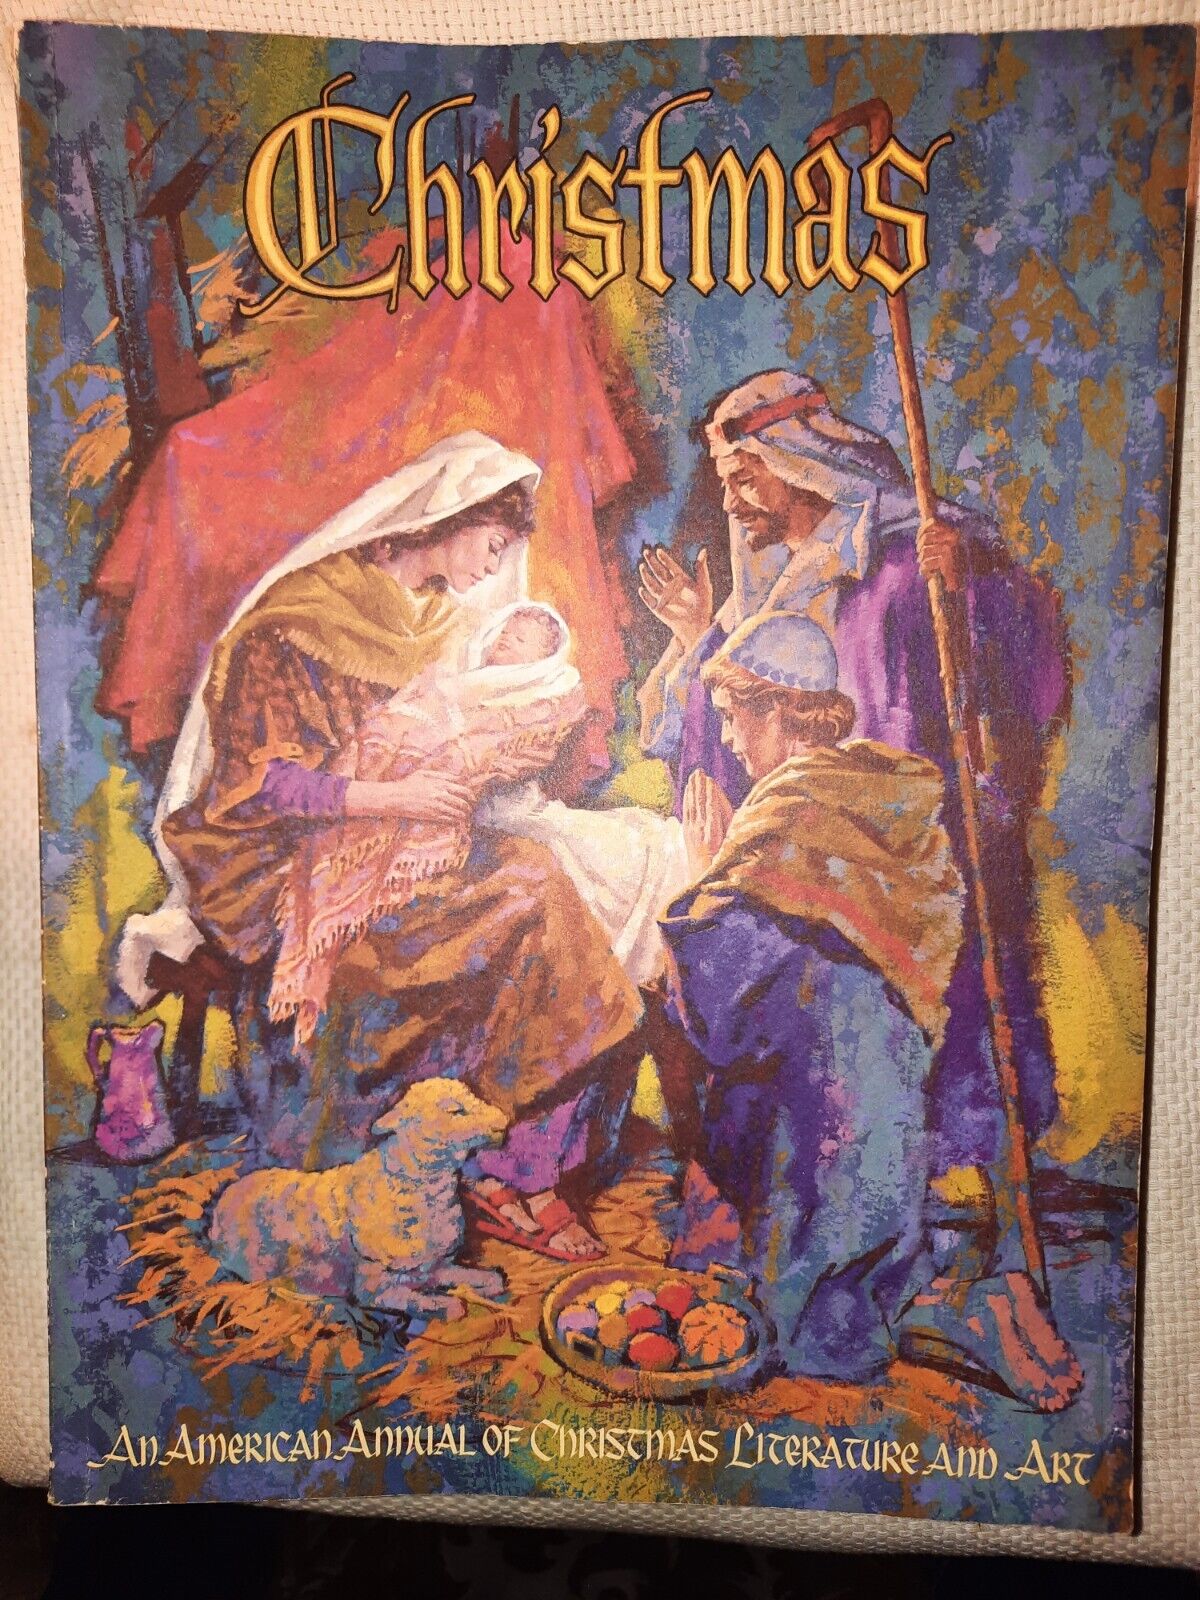 LOT Of 13-Christmas, An American Annual Of Christmas Literature And Art Books...